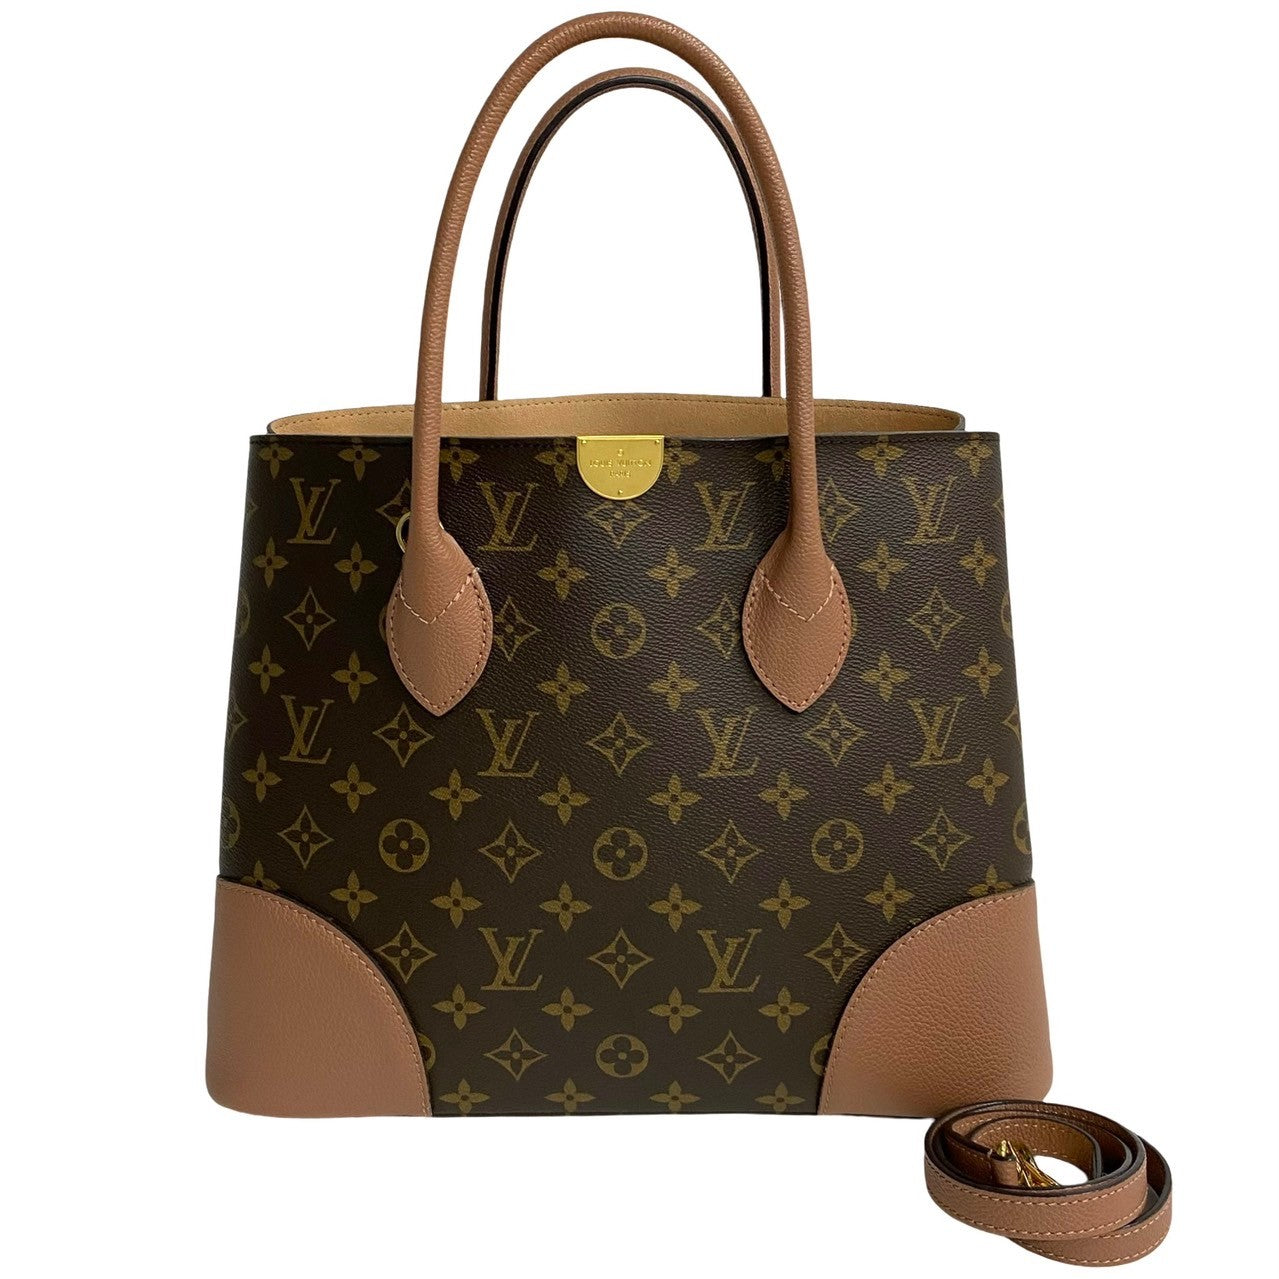 Louis Vuitton Flandrin Canvas Tote Bag M41596 in Excellent condition